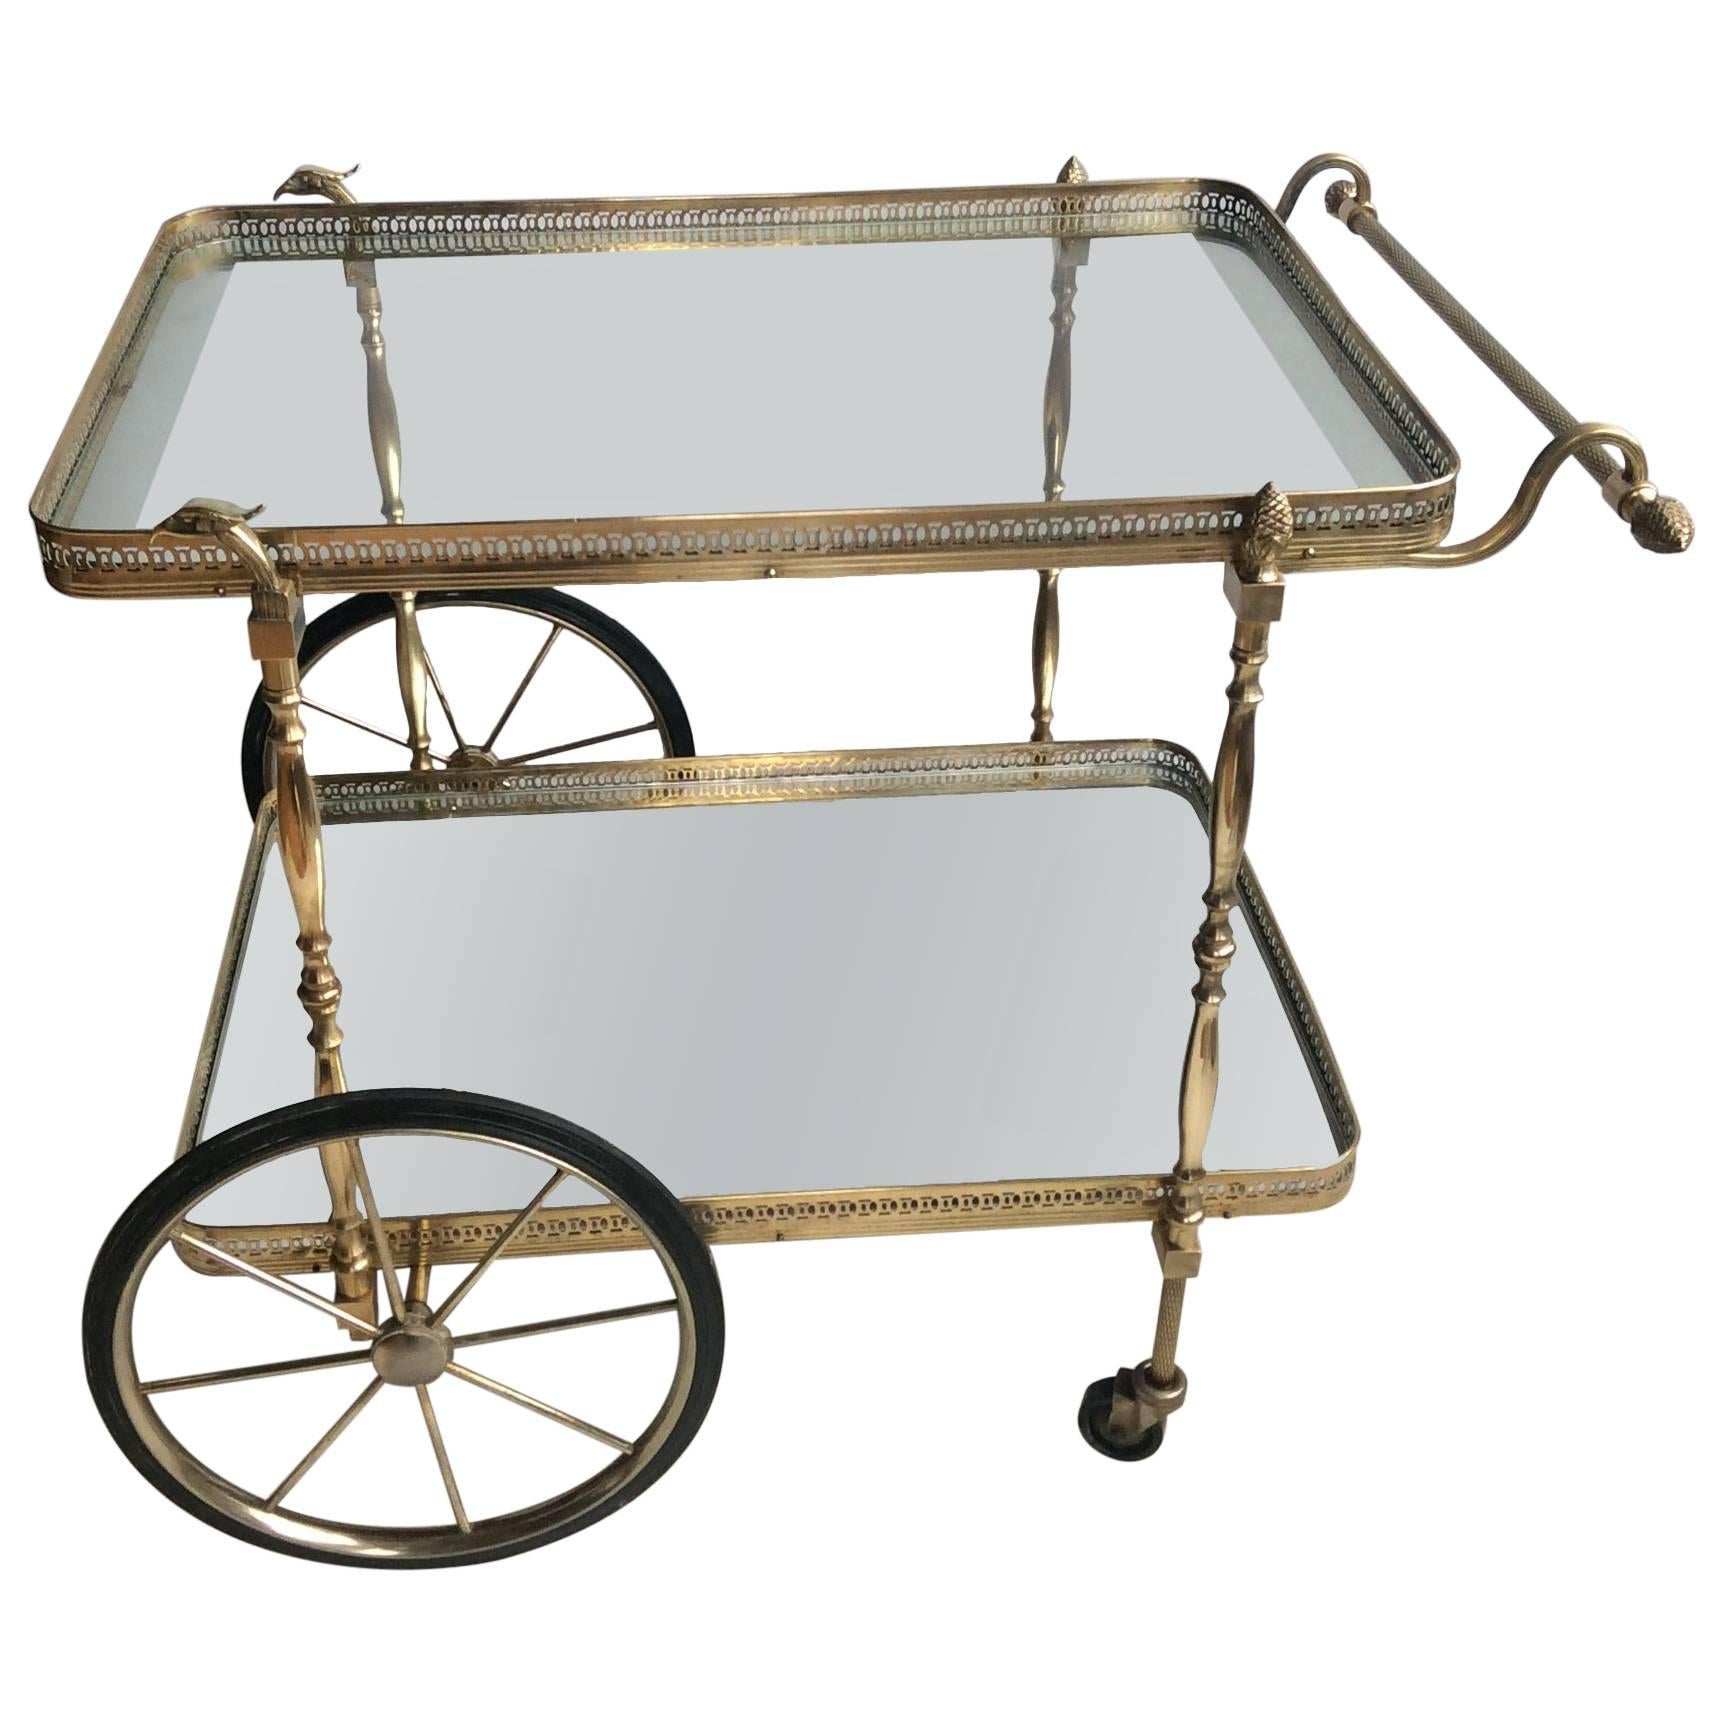 Decorative French Brass Drinks Trolley or Bar Cart